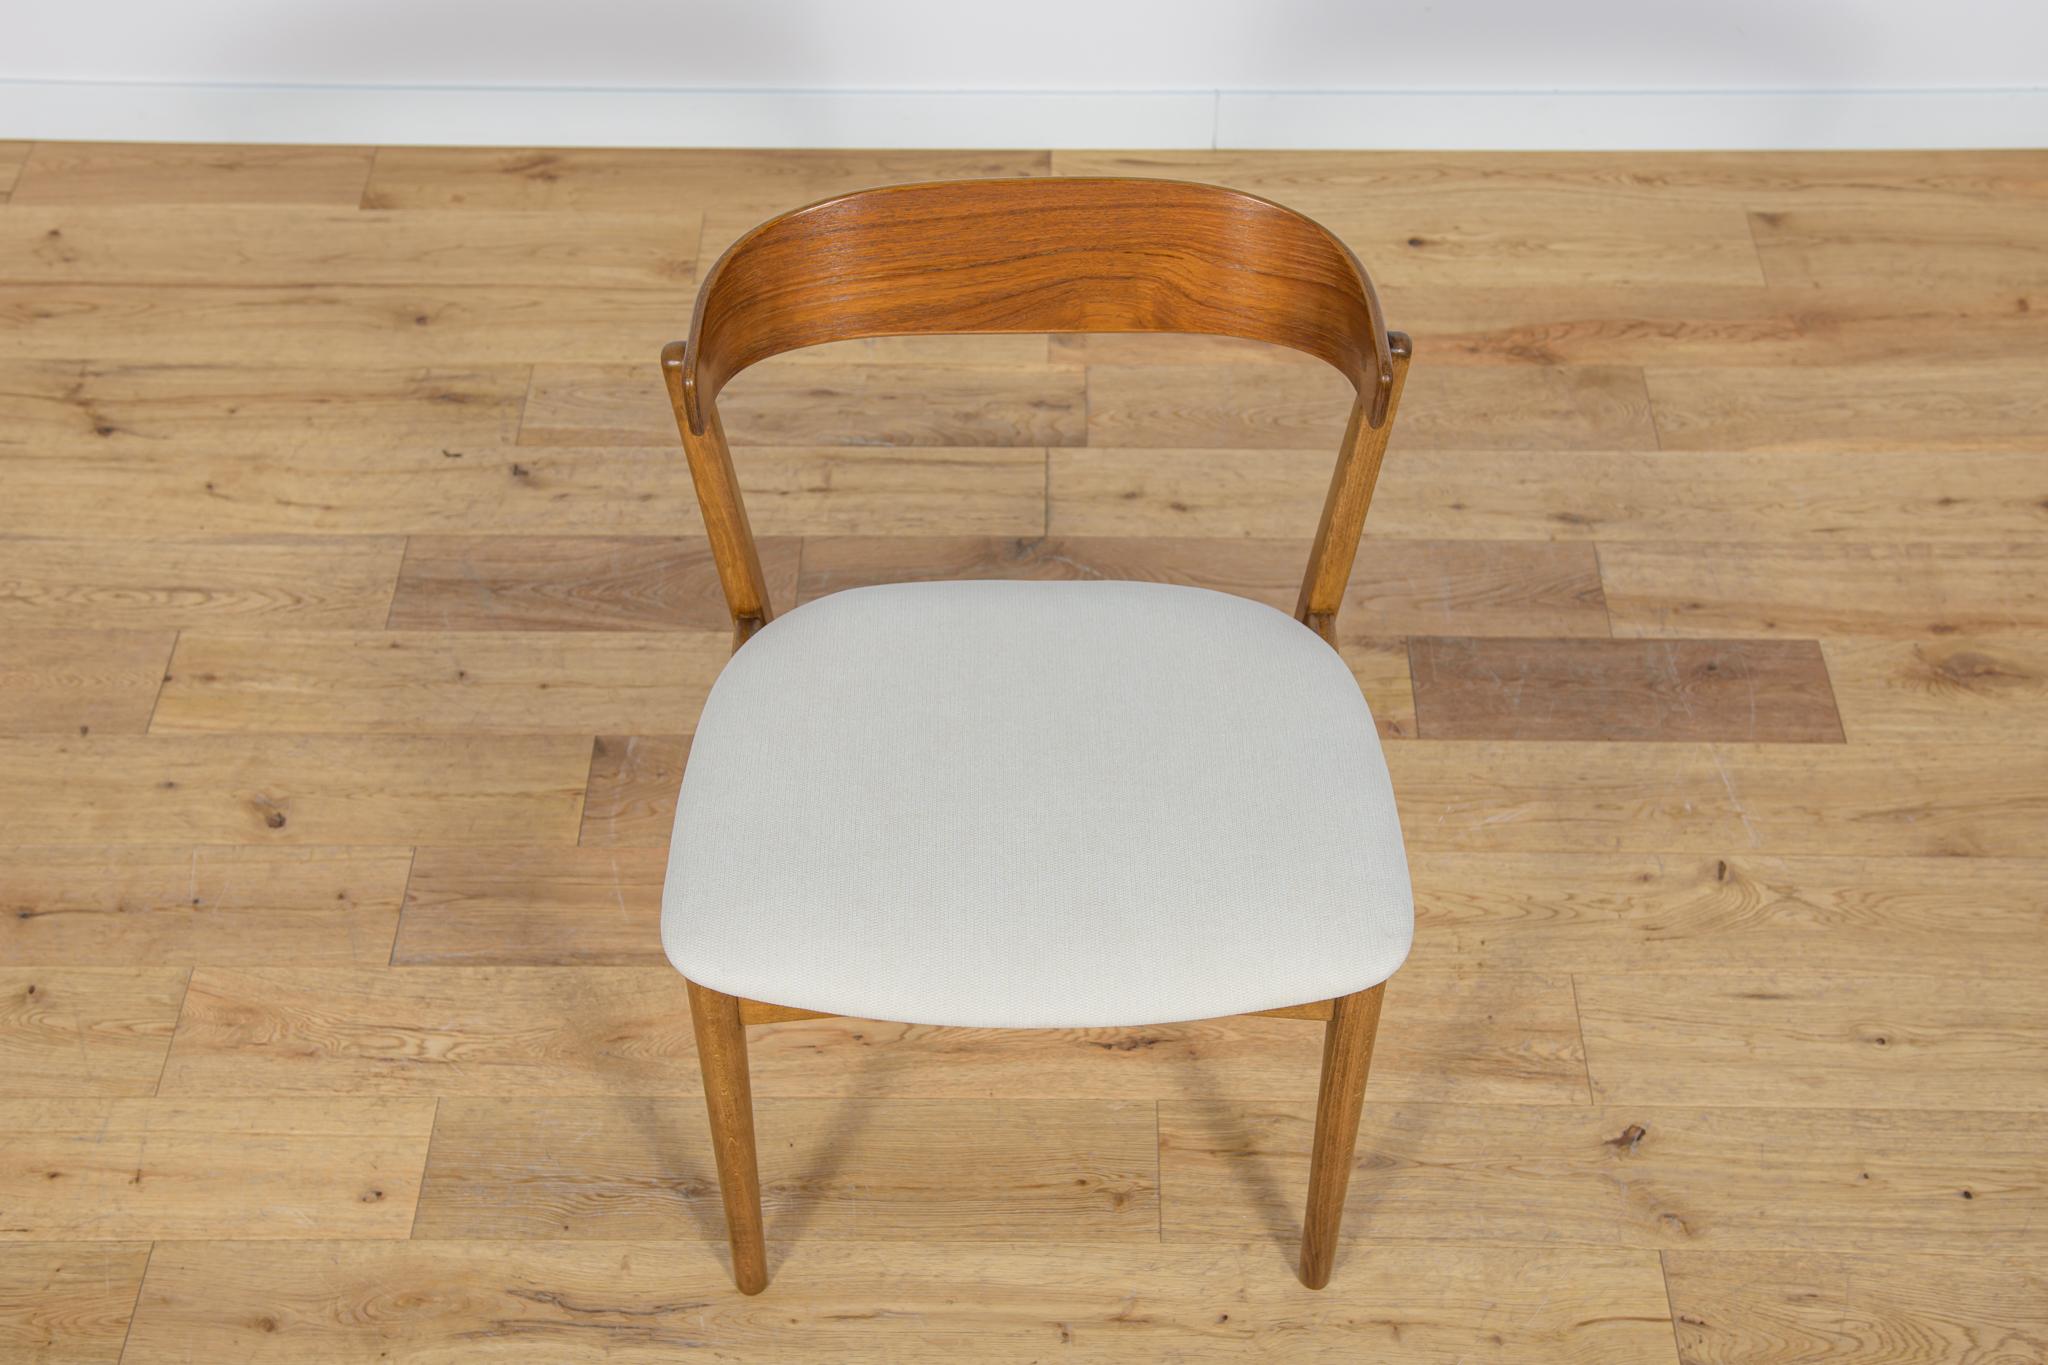 Beech Mid-Century Model 206 Dining Chairs from Farstrup Furniture, 1960s, Denmark. For Sale